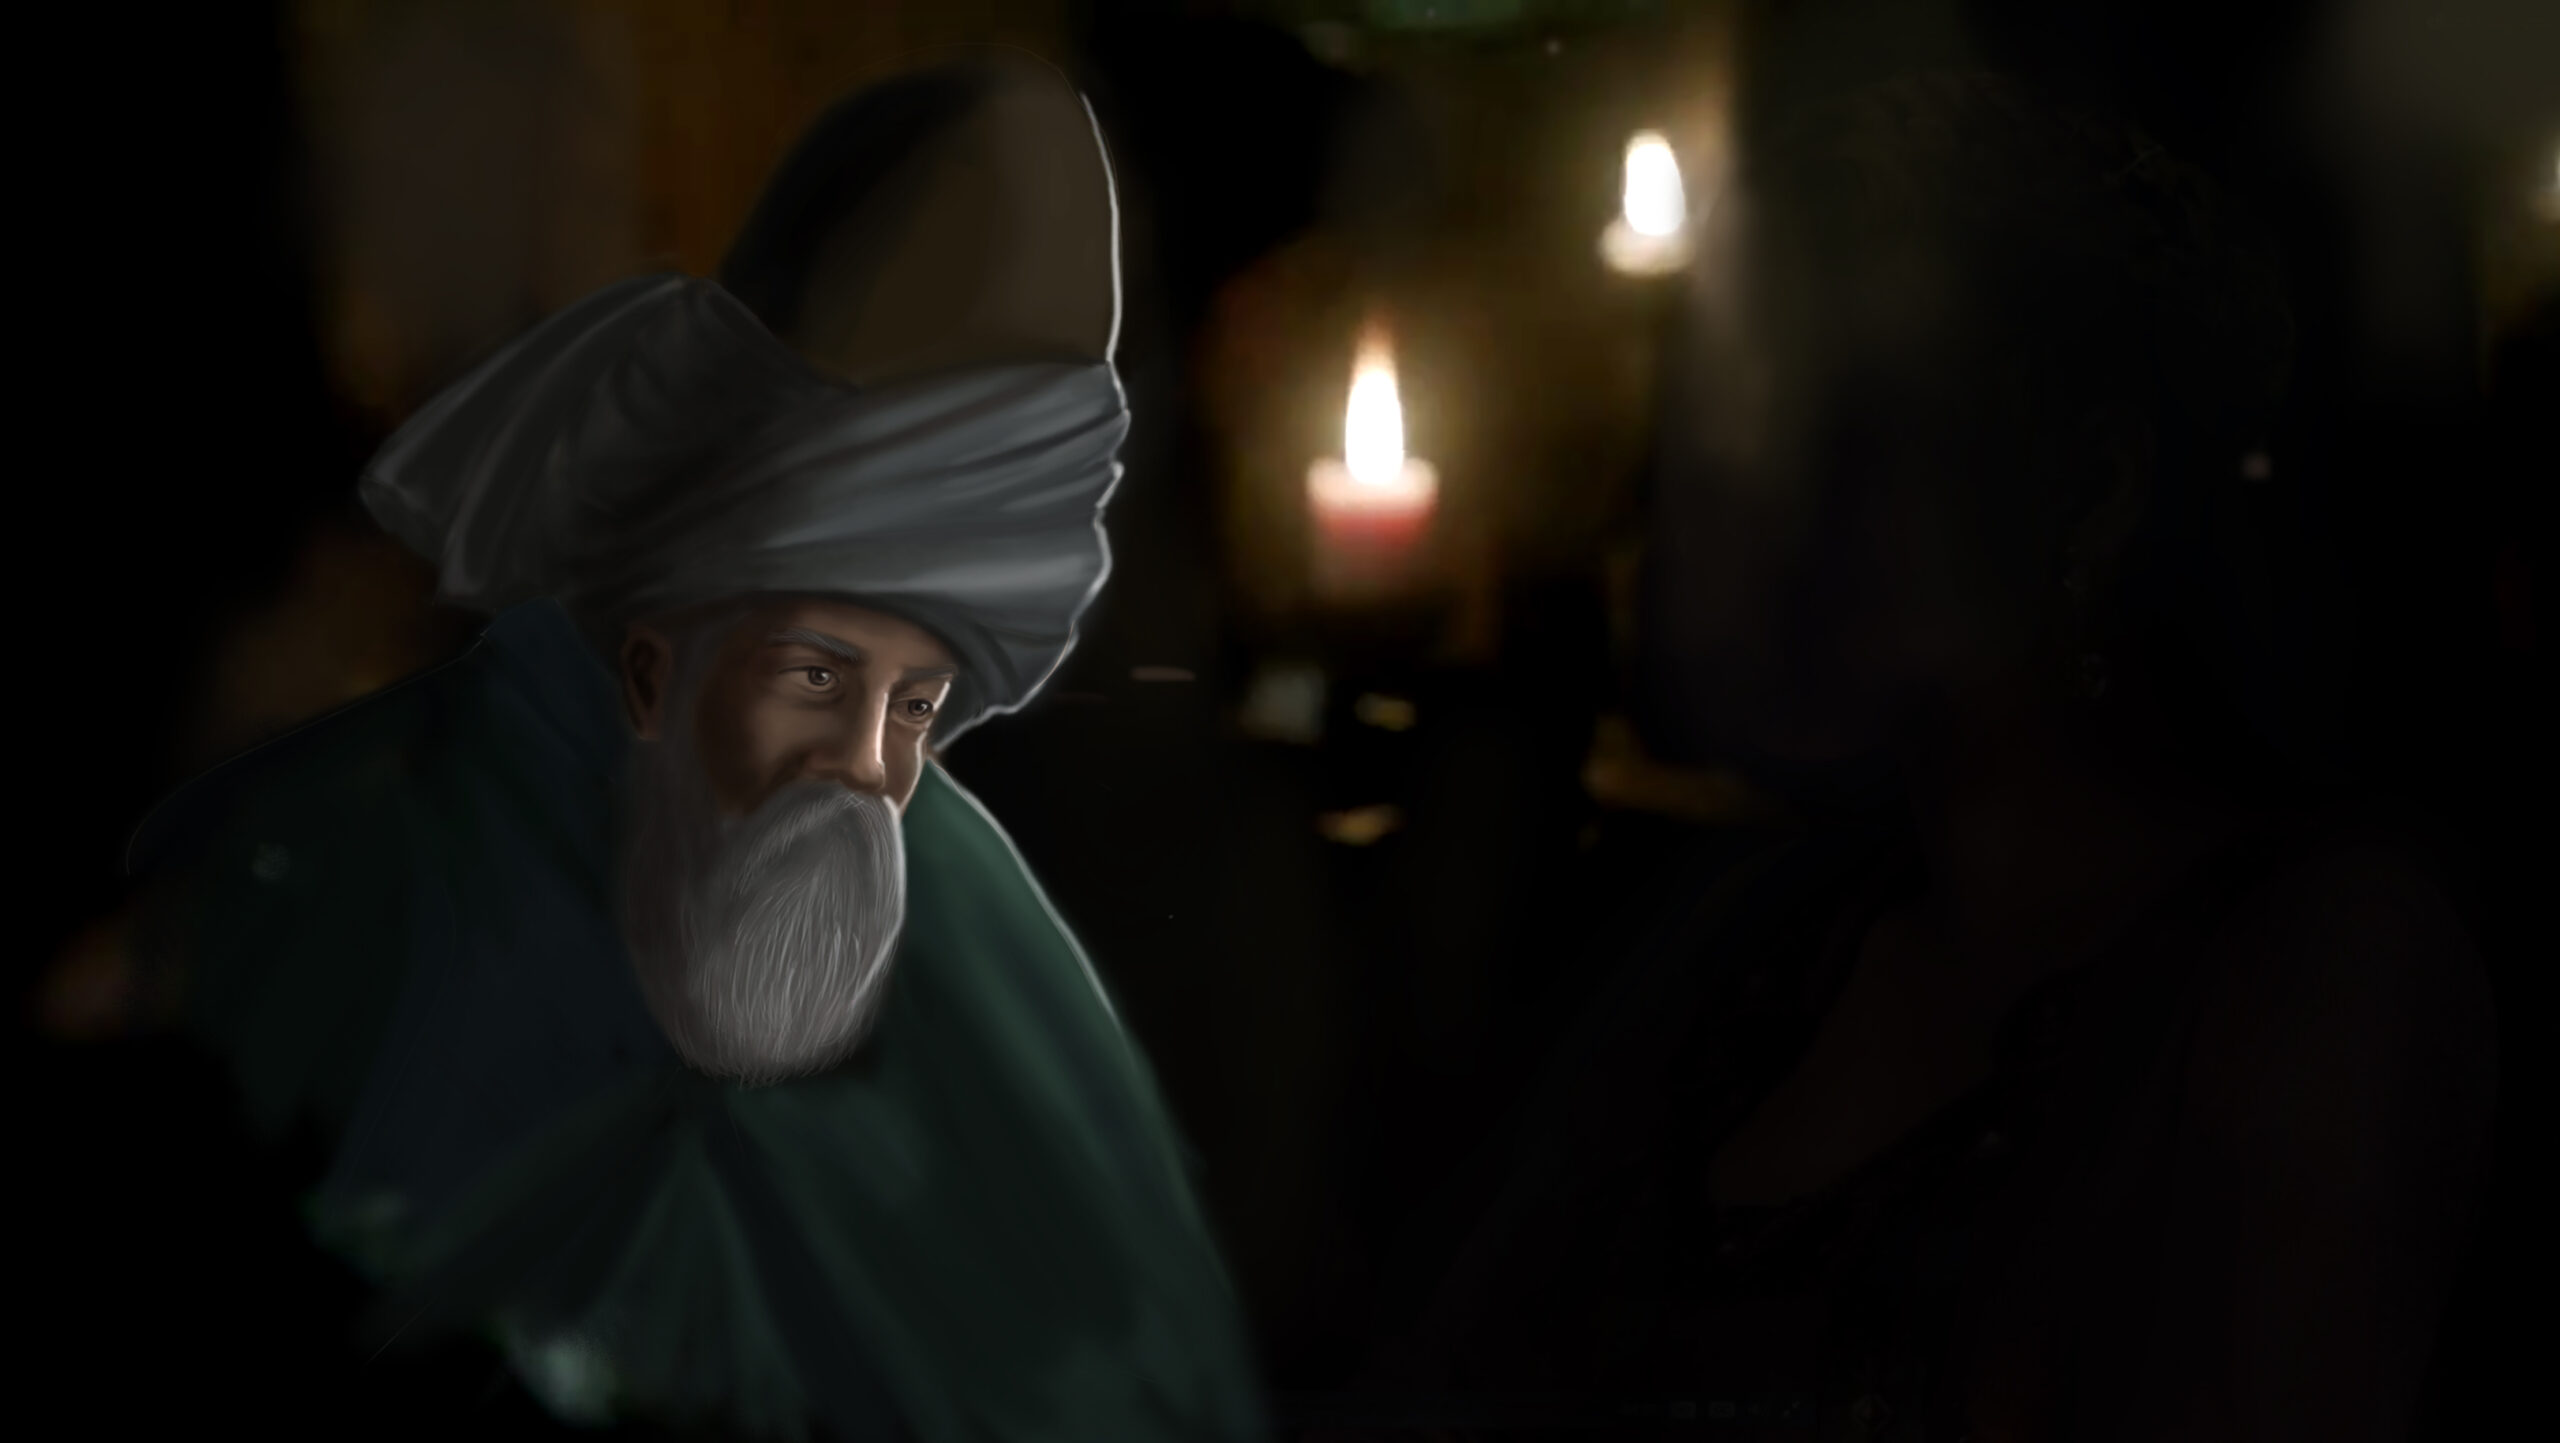 an illustration of the most famous Sufi, Rumi